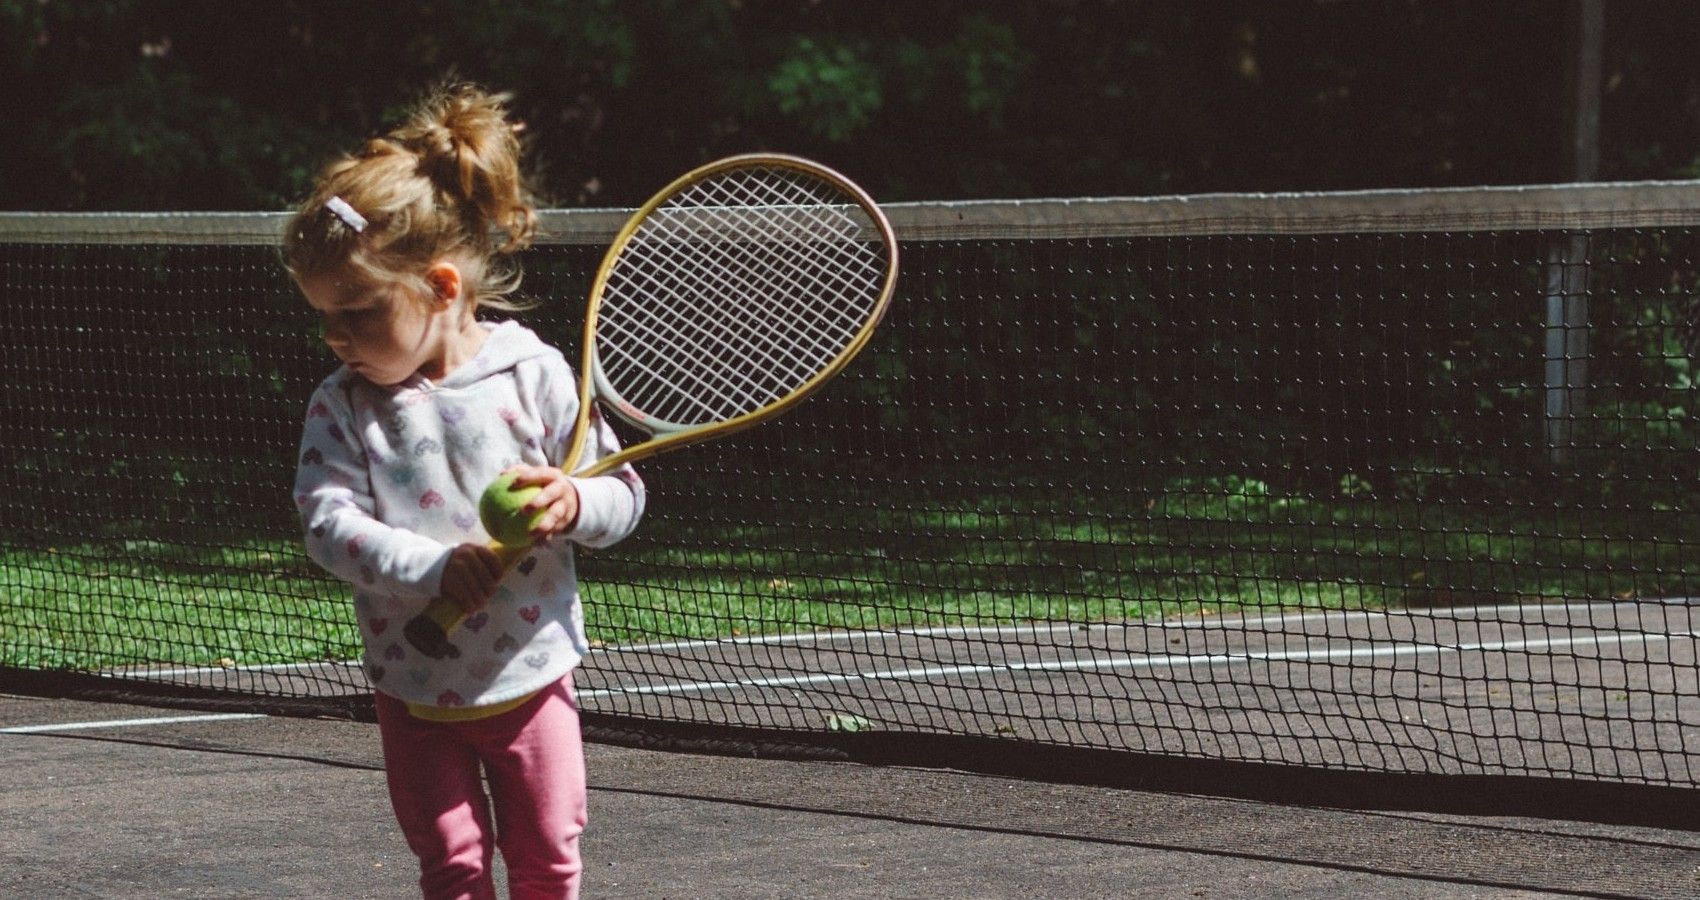 A Young Girl Playing Tennis On A Court